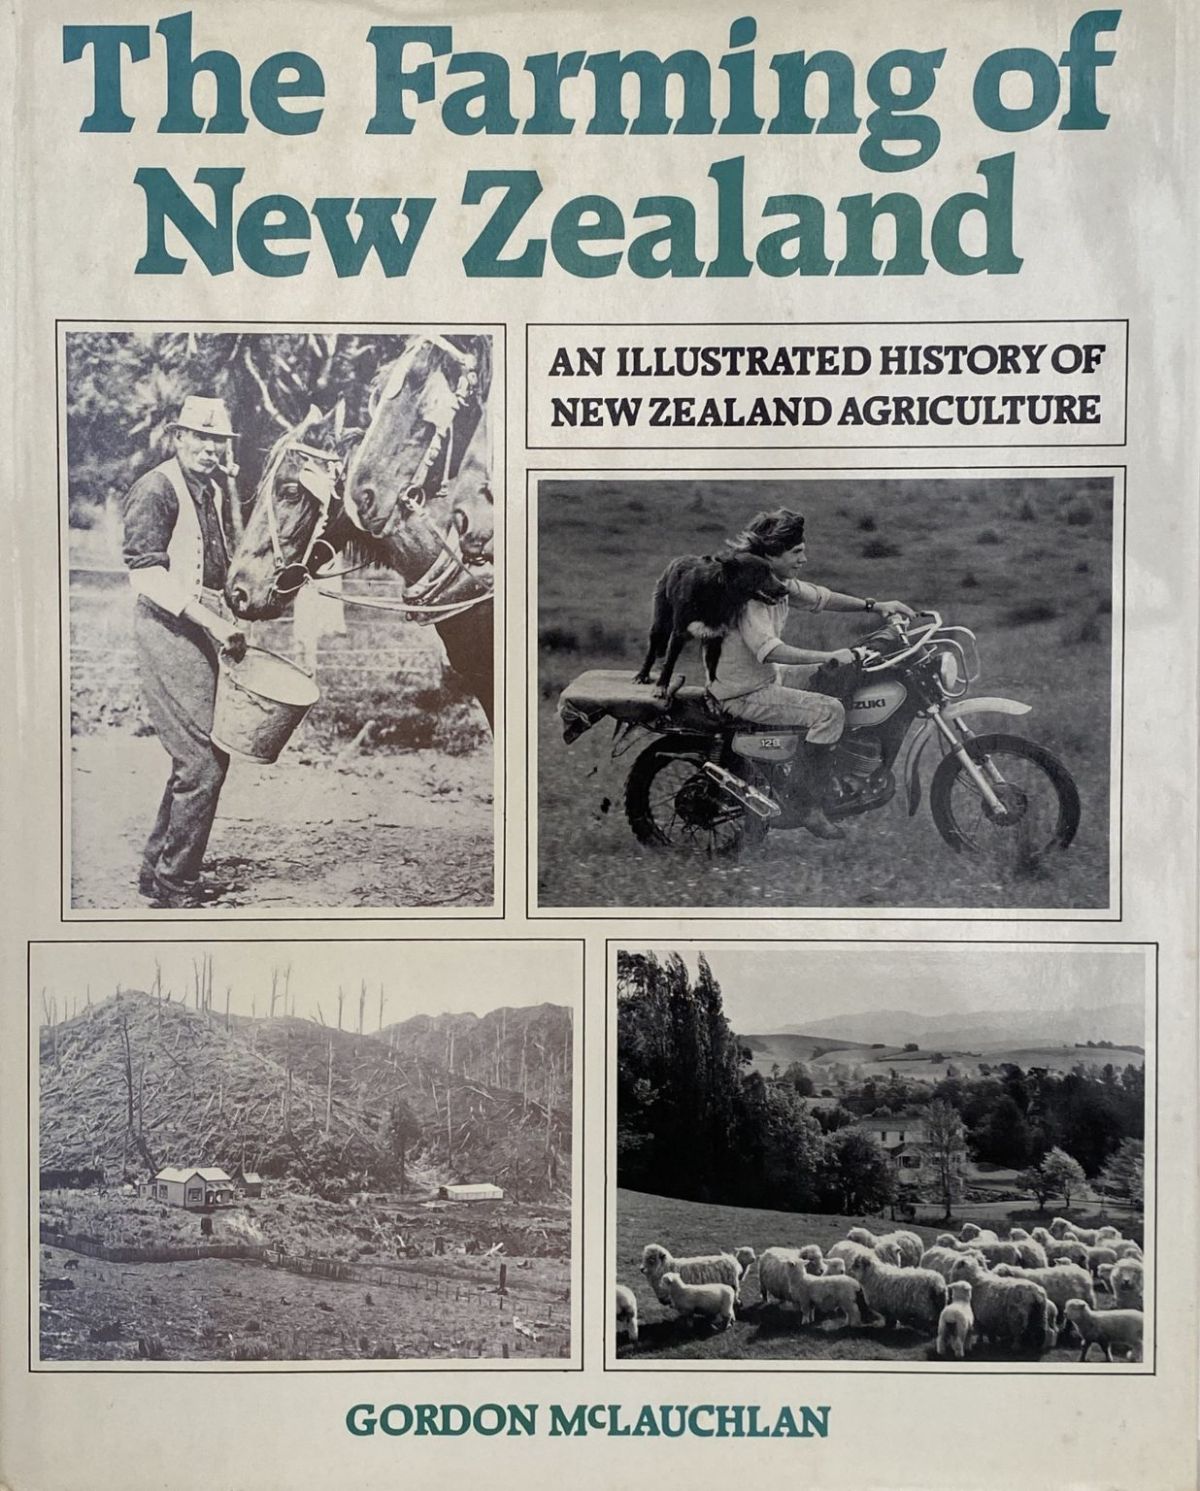 THE FARMING OF NEW ZEALAND: An Illustrated History of New Zealand Agriculture